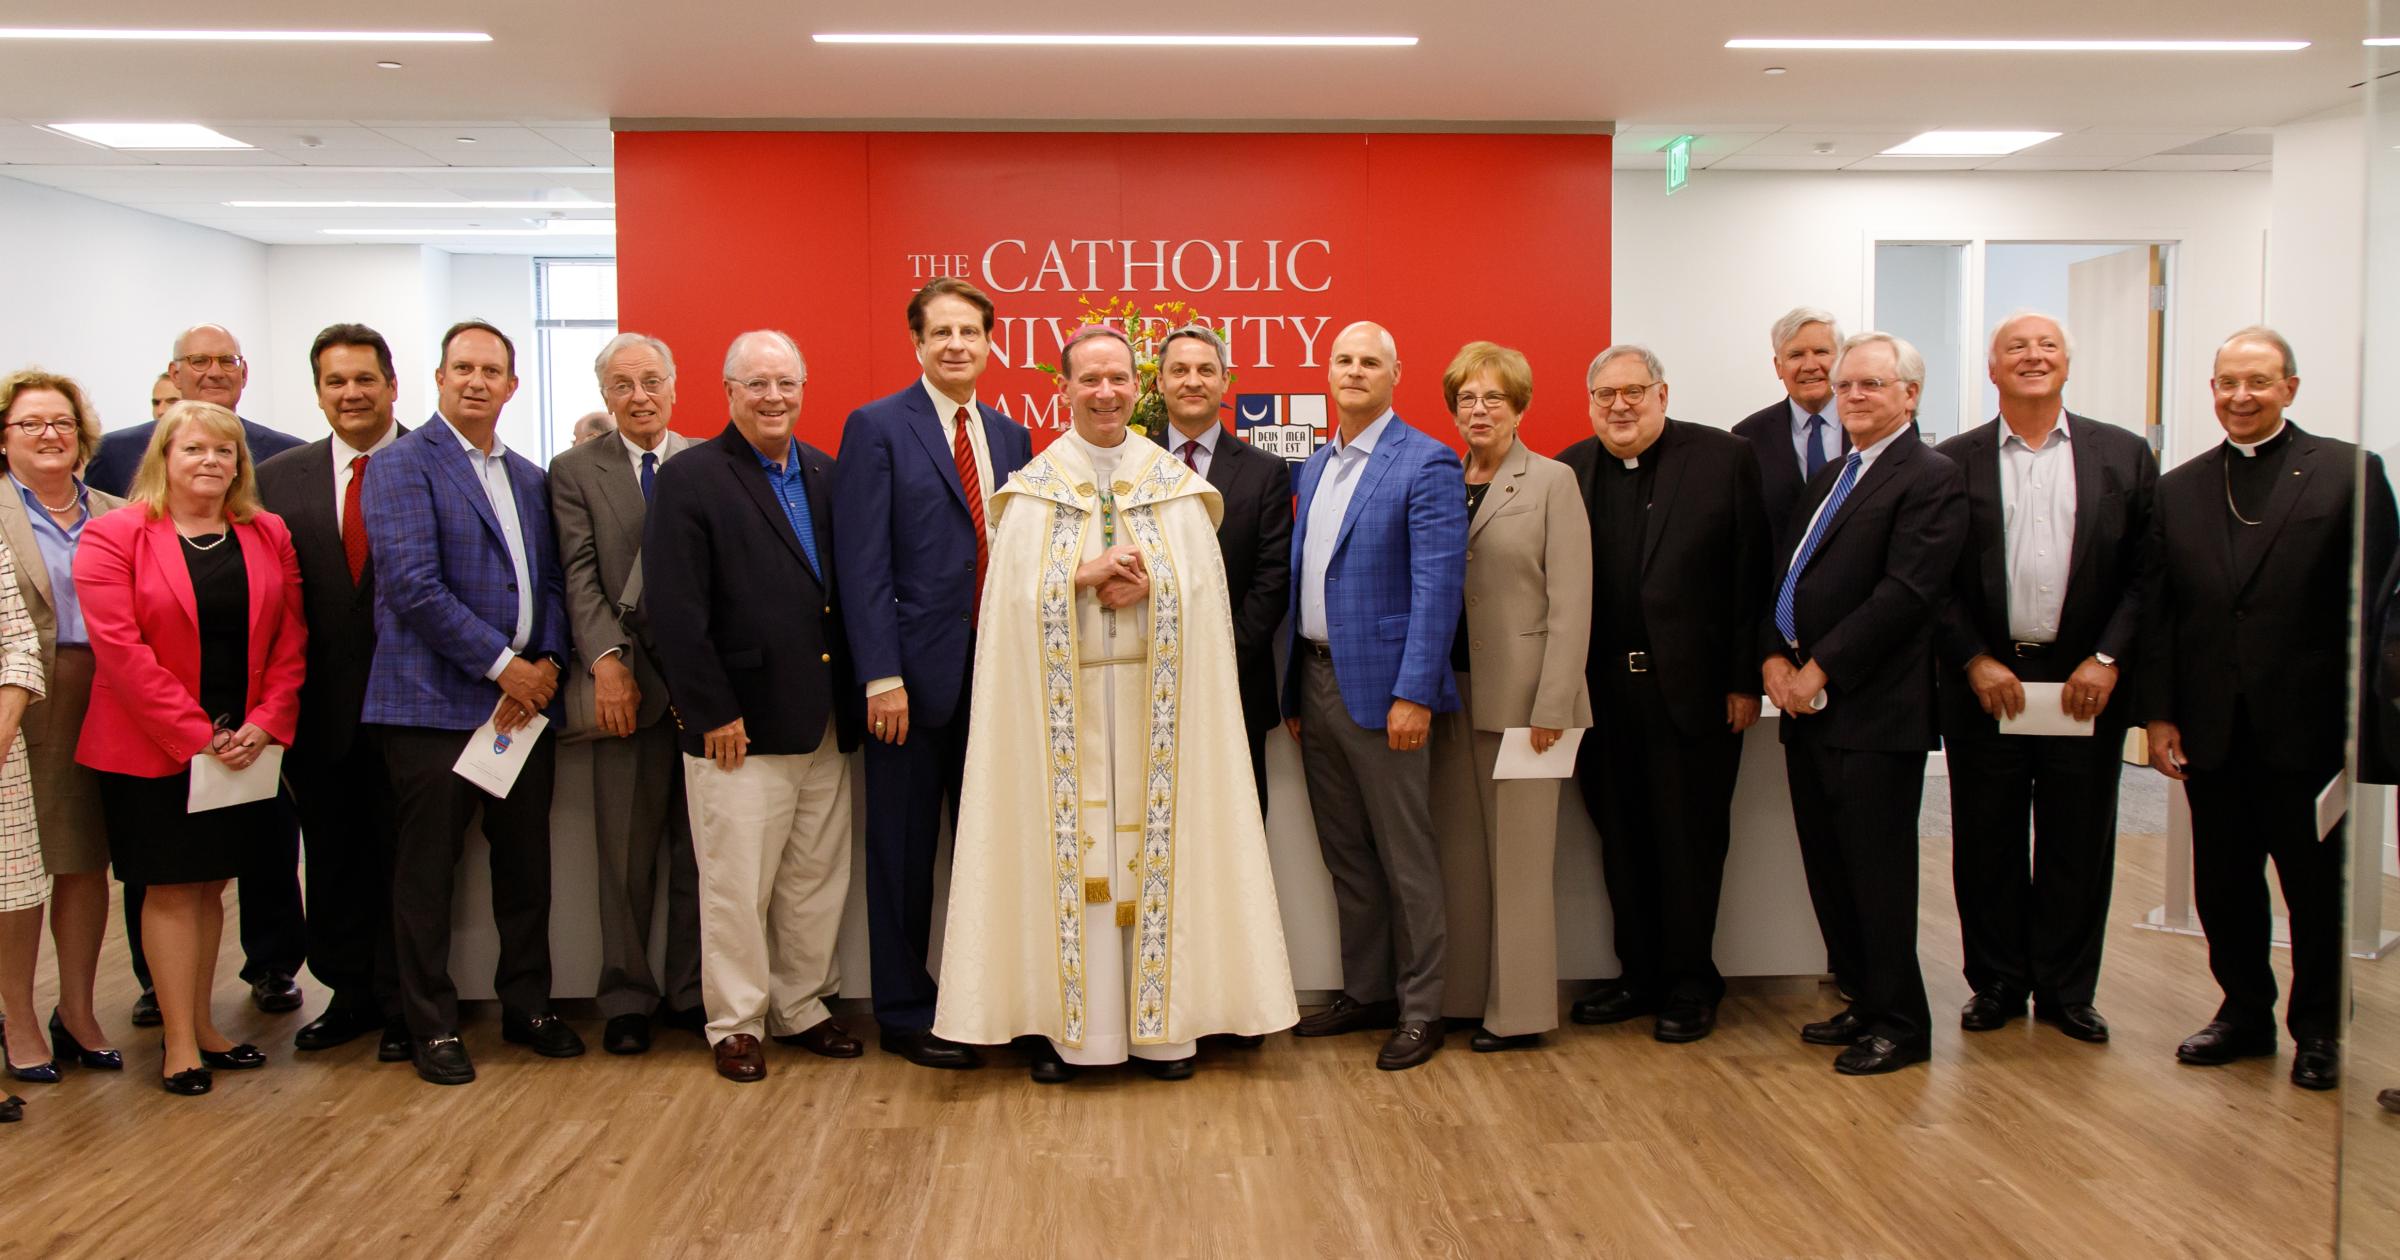 The Catholic University Board of Trustees at the Alexandria blessing